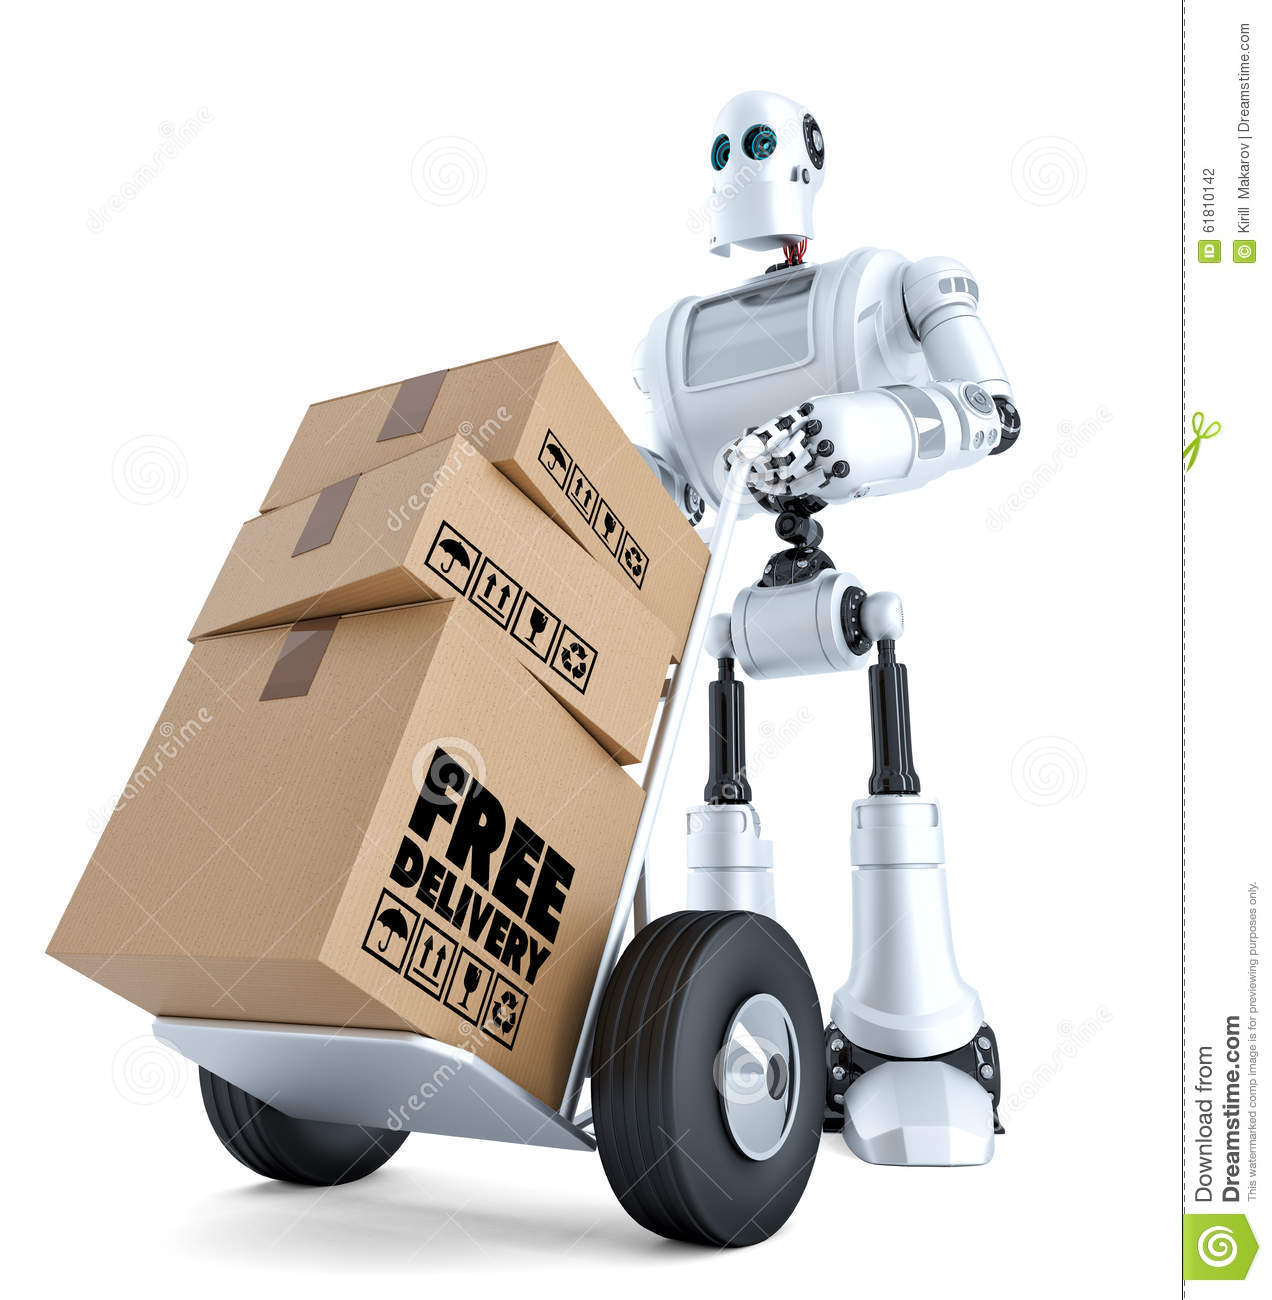 d-courier-robot-hand-truck-free-delivery-concept-isolated-clipping-path-loaded-packages-over-white-contains-61810142.jpg